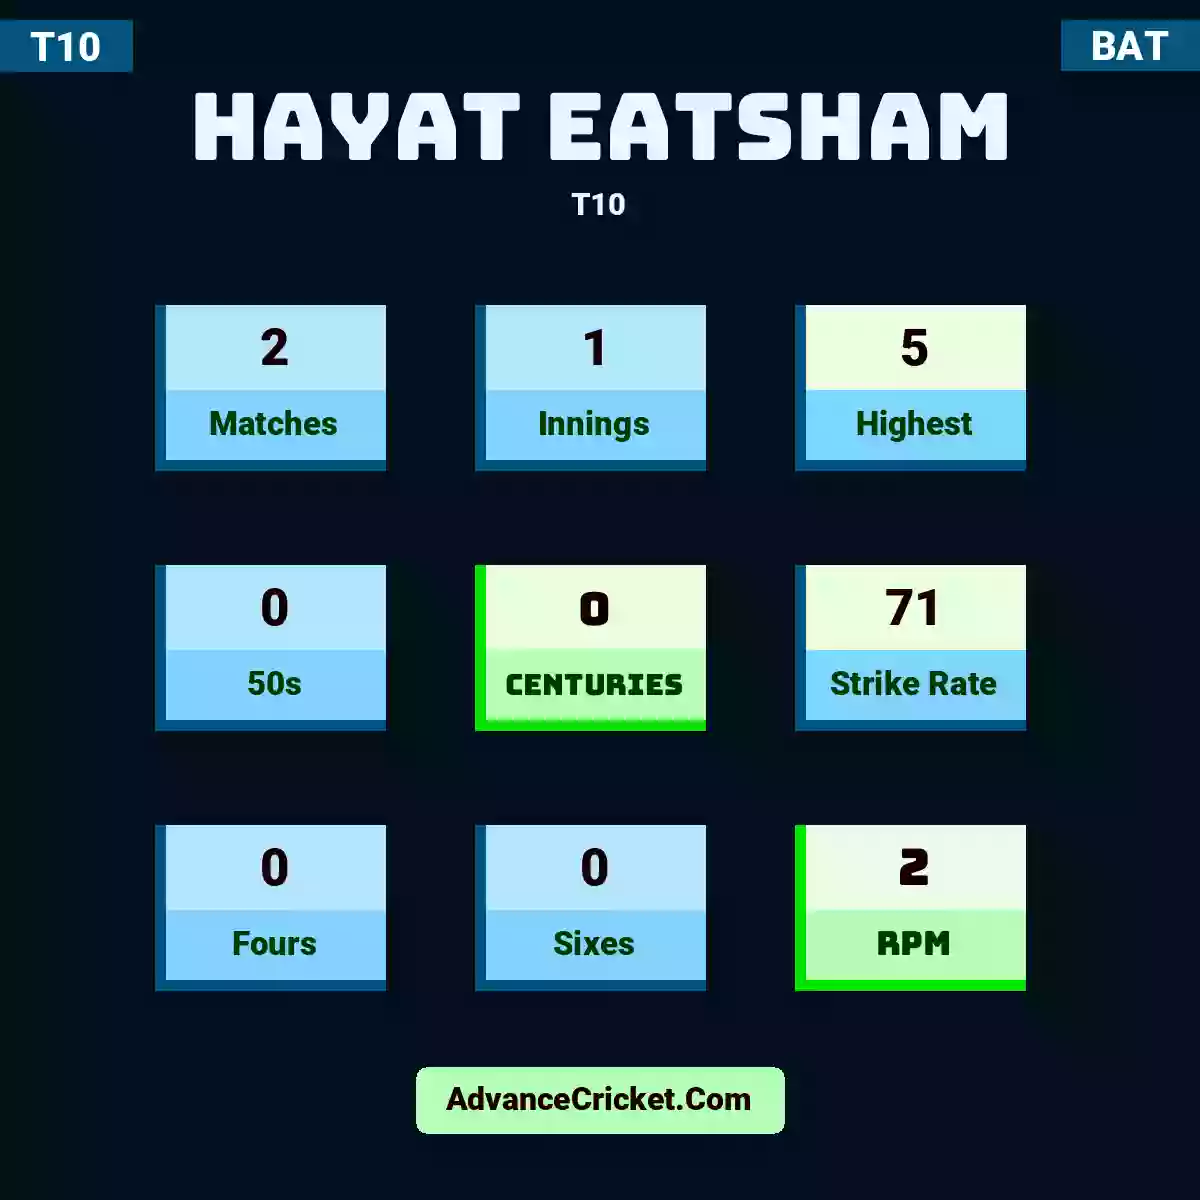 Hayat Eatsham T10 , Hayat Eatsham played 2 matches, scored 5 runs as highest, 0 half-centuries, and 0 centuries, with a strike rate of 71. H.Eatsham hit 0 fours and 0 sixes, with an RPM of 2.